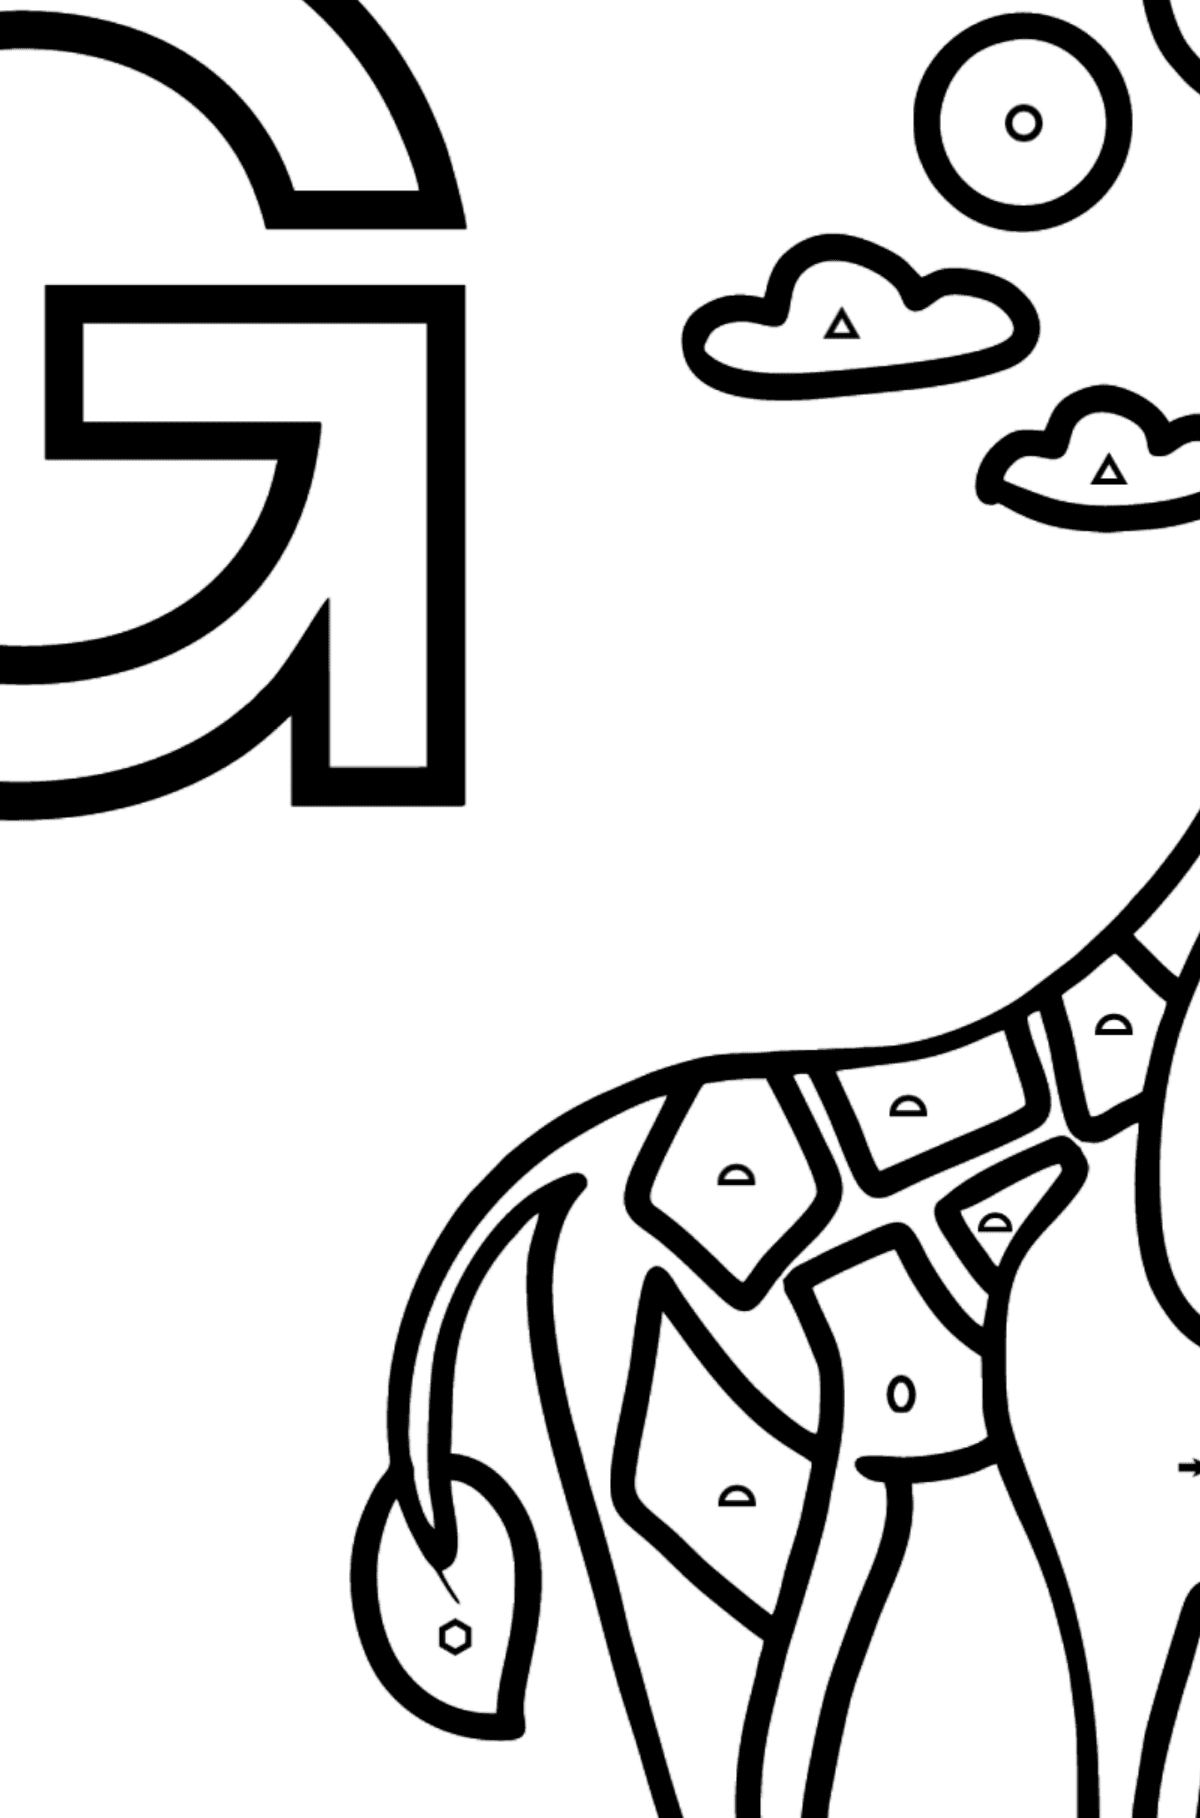 Portuguese Letter G coloring pages - GIRAFA - Coloring by Symbols and Geometric Shapes for Kids